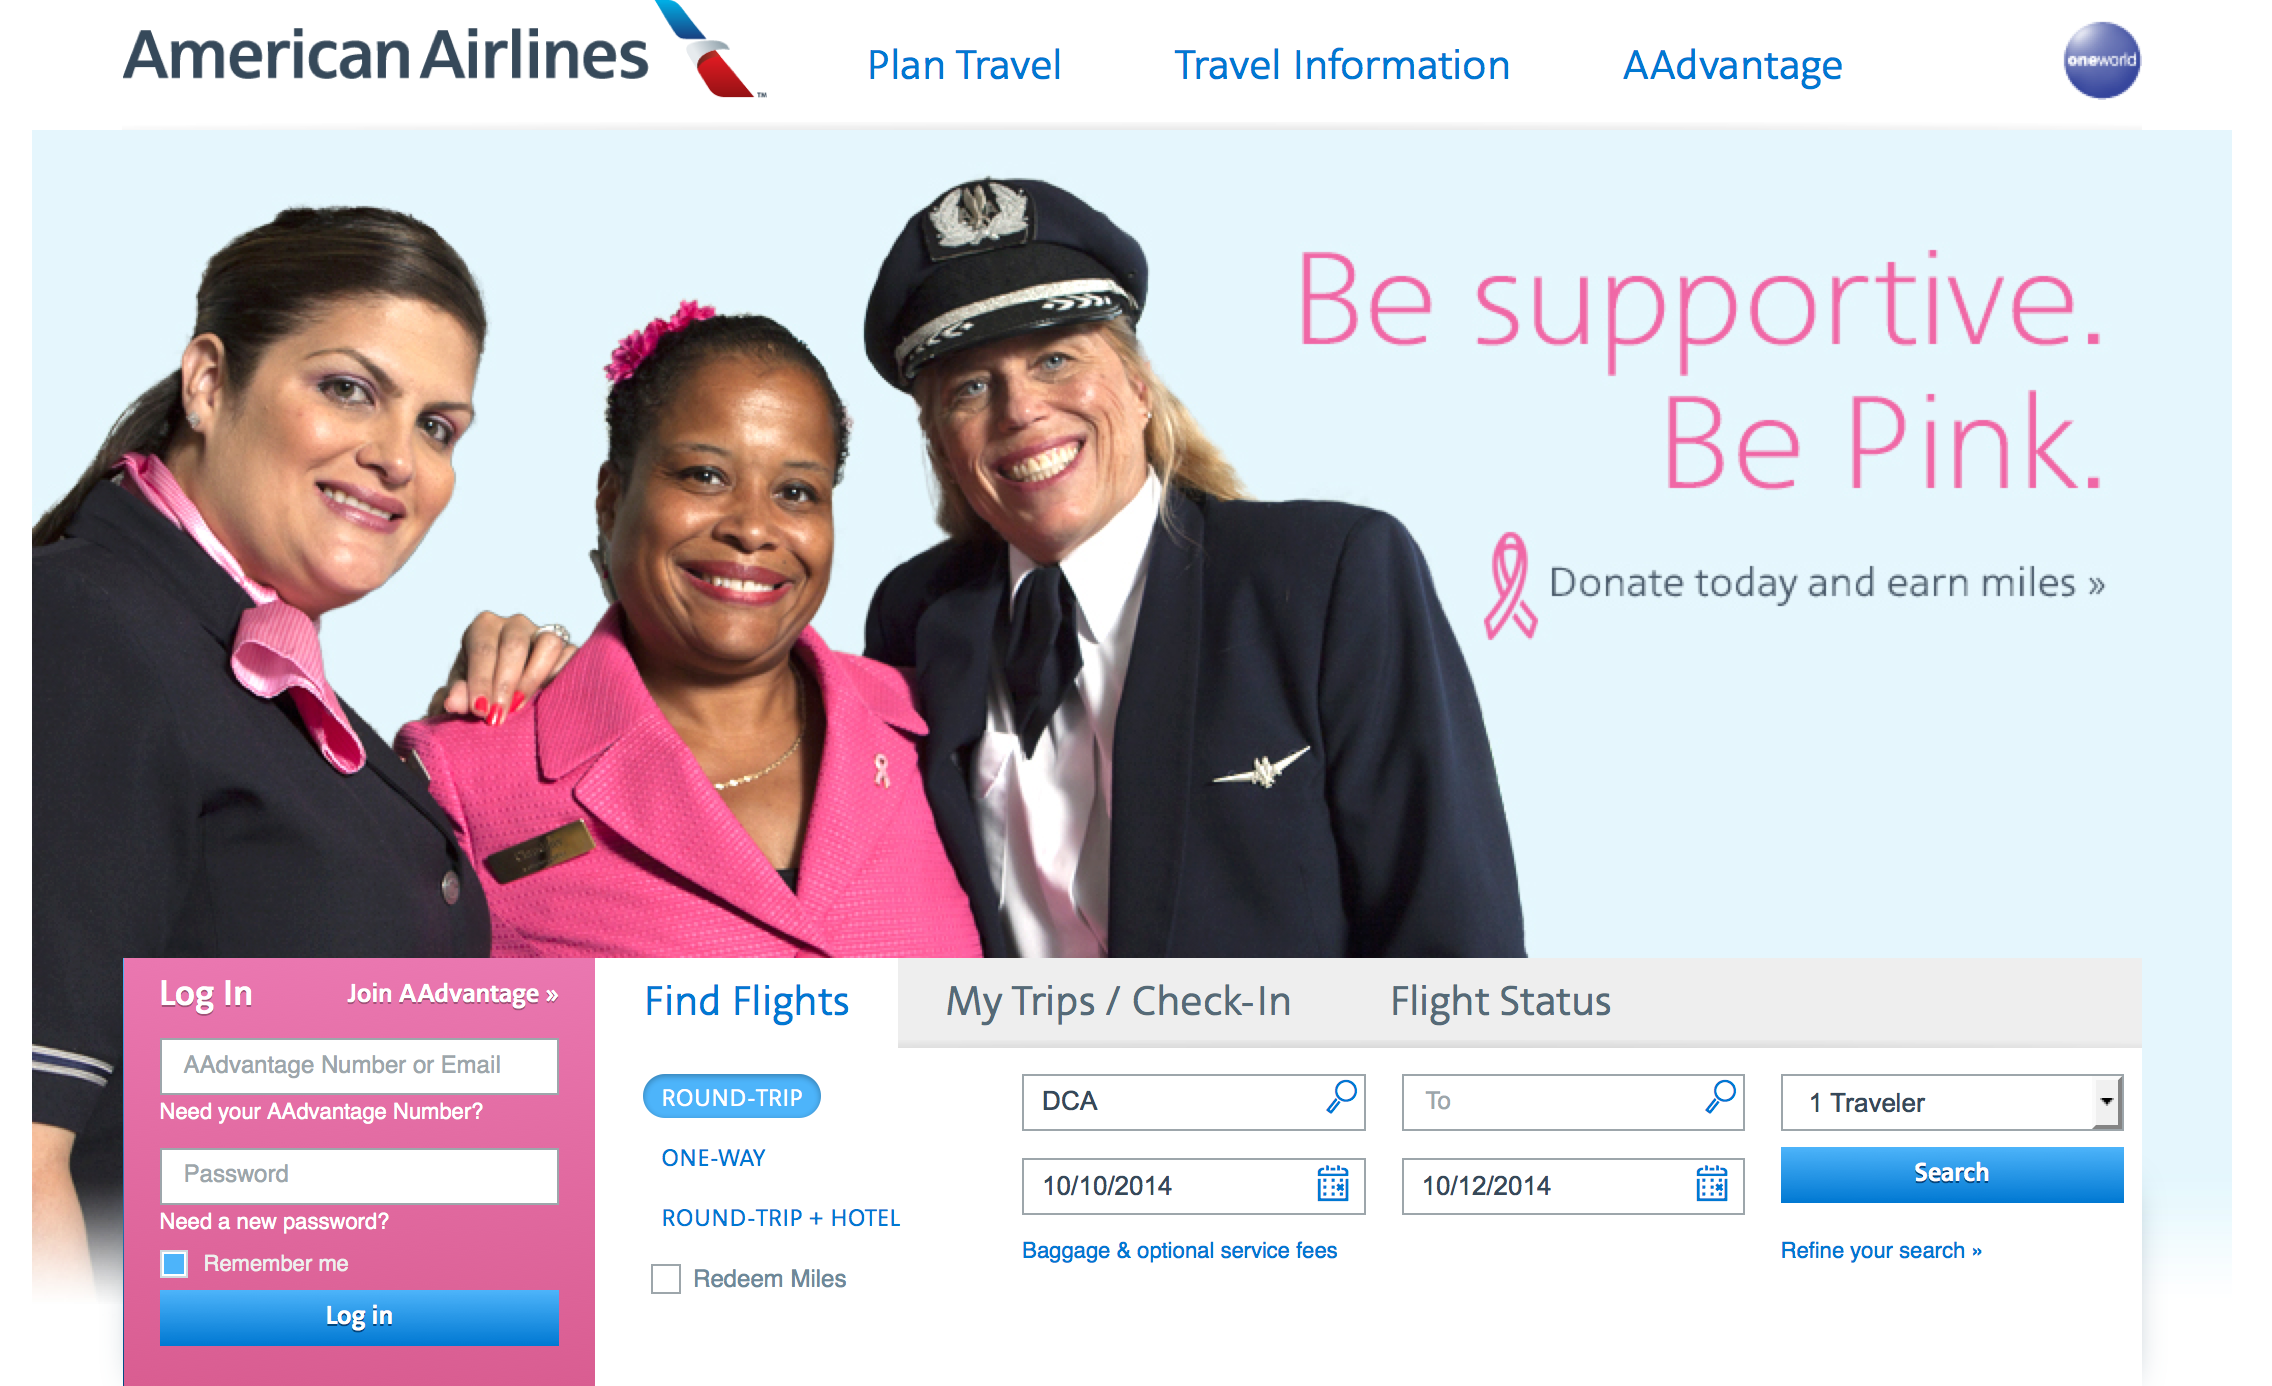 AA.com goes PINK in honor of Breast Cancer Awareness